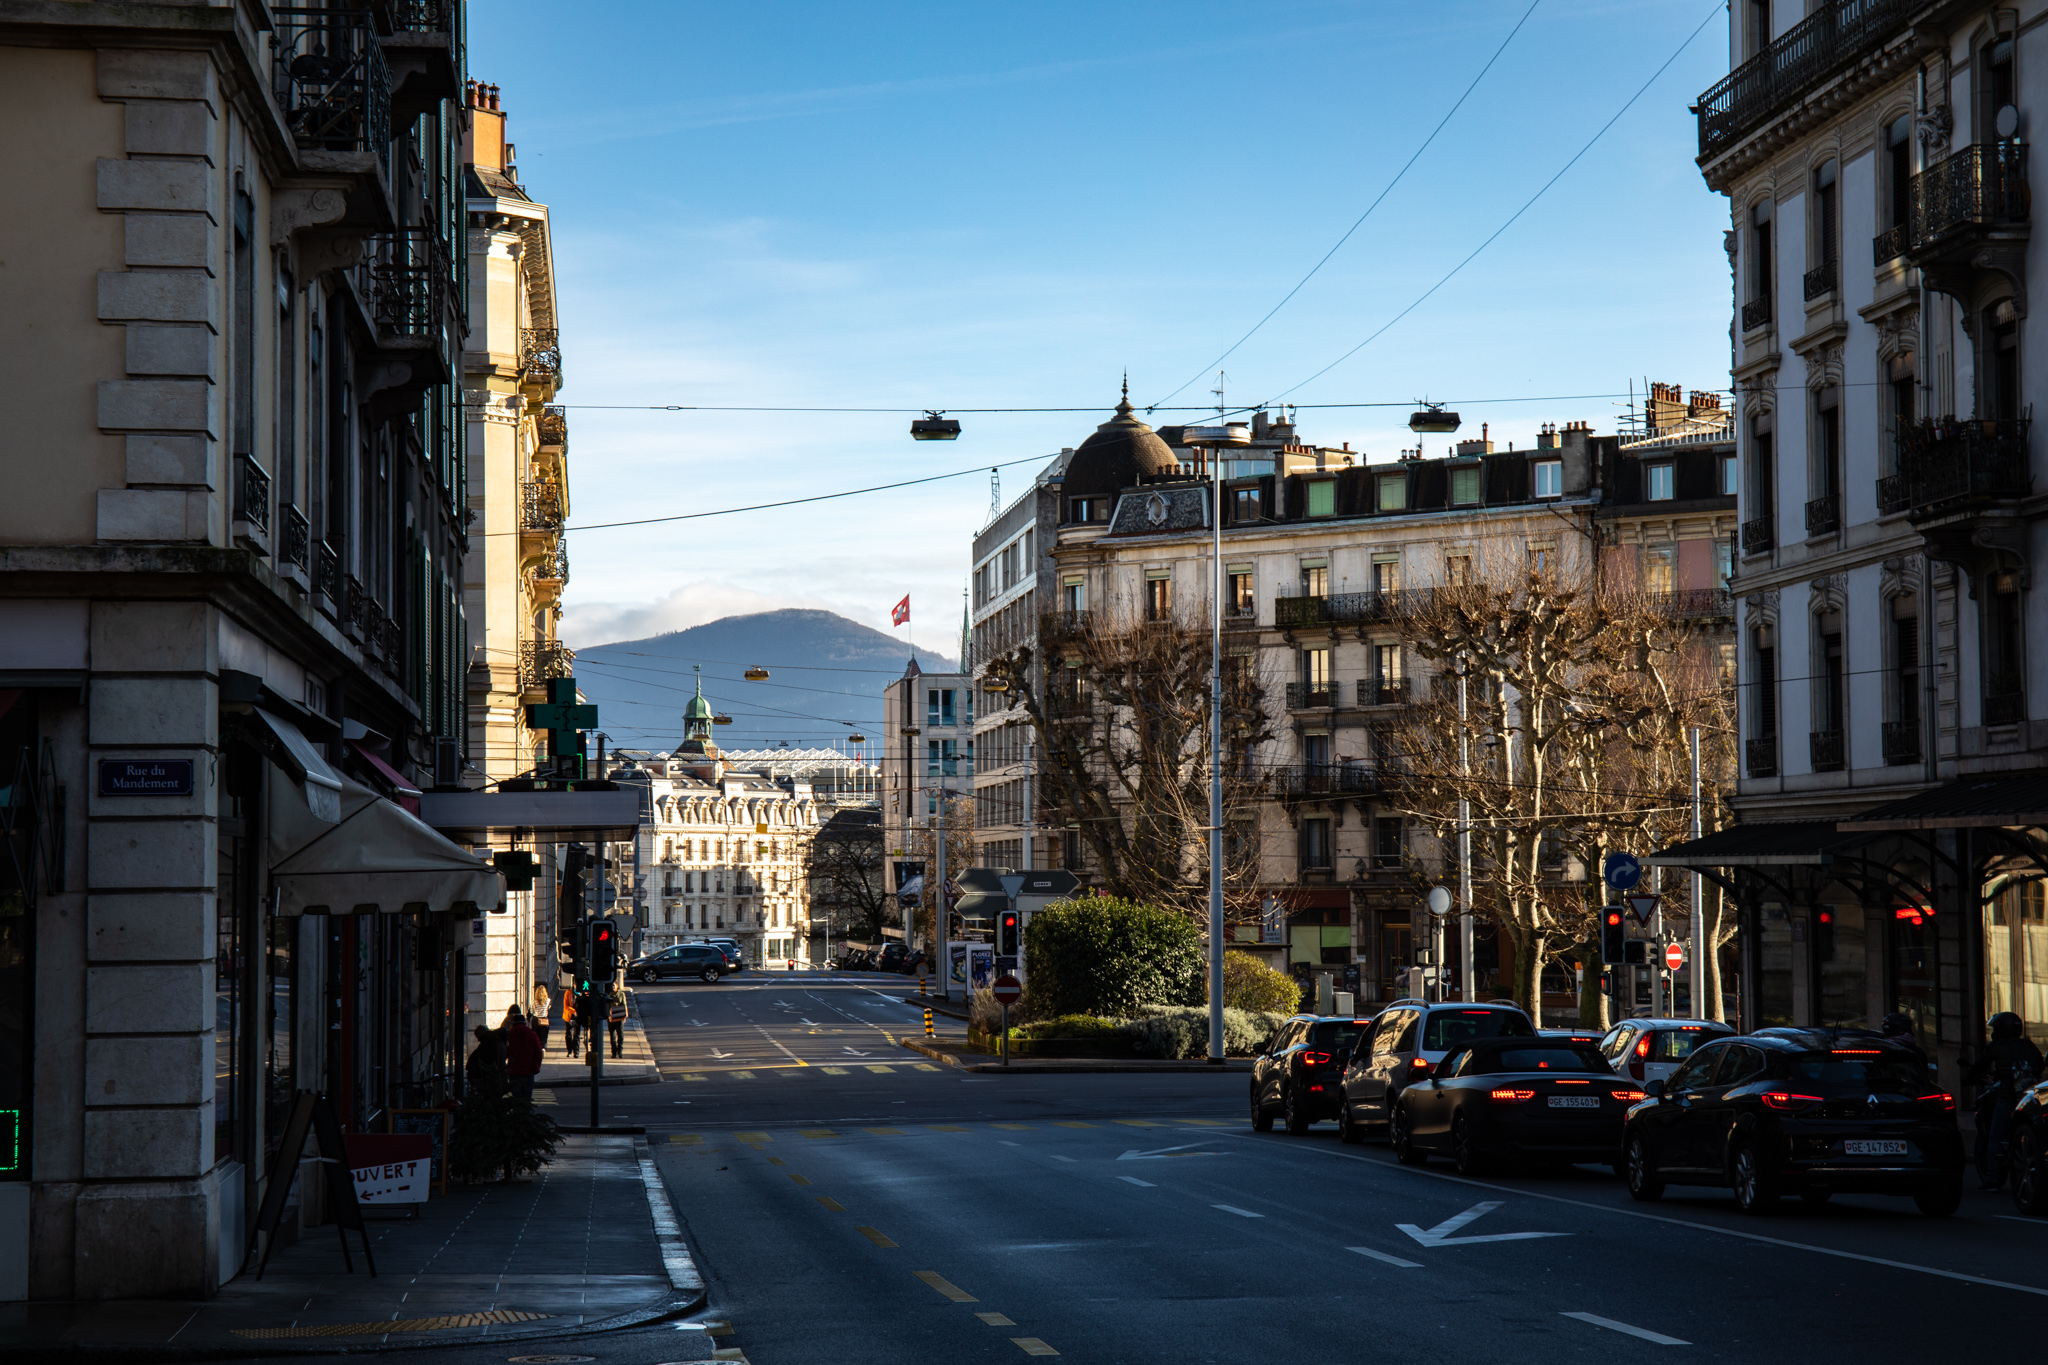 General 2048x1365 photography outdoors urban building city Geneva architecture road mountains street